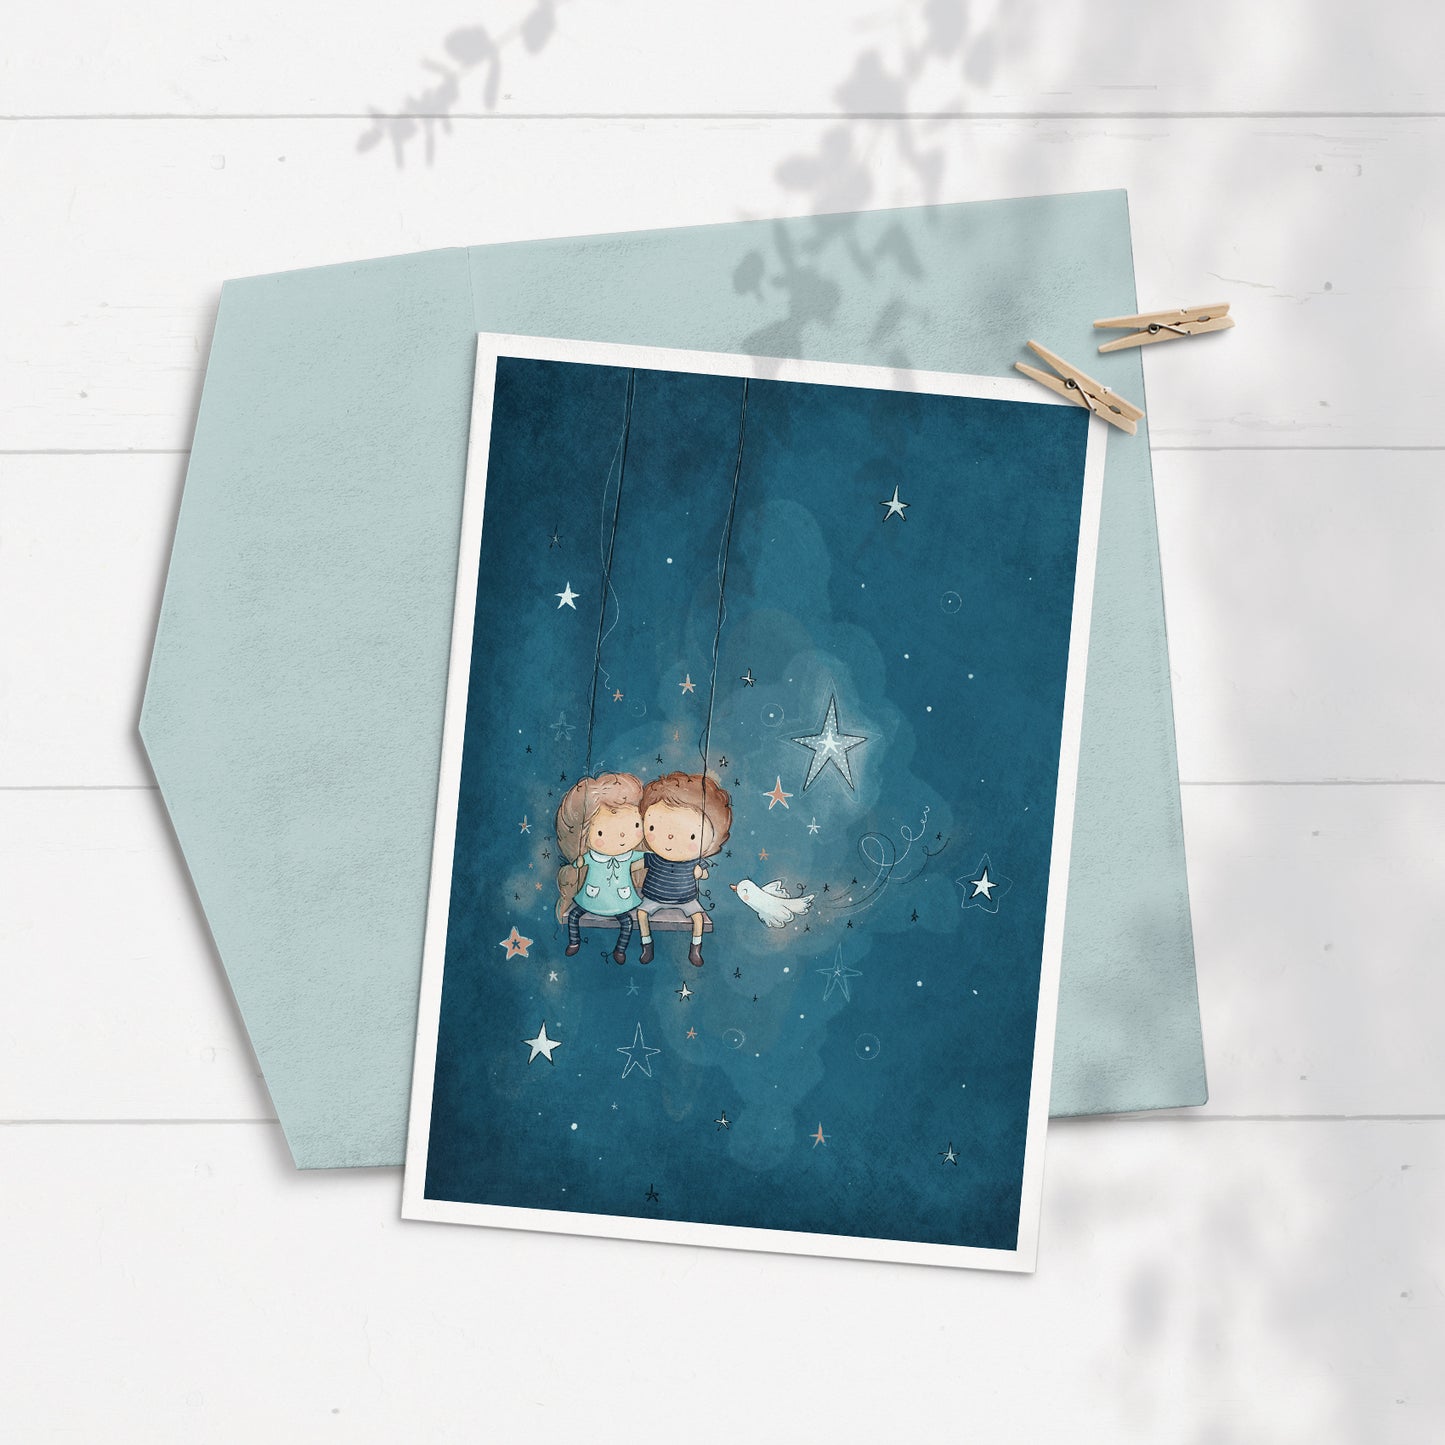 Starry Swing 5x7 Greeting Card